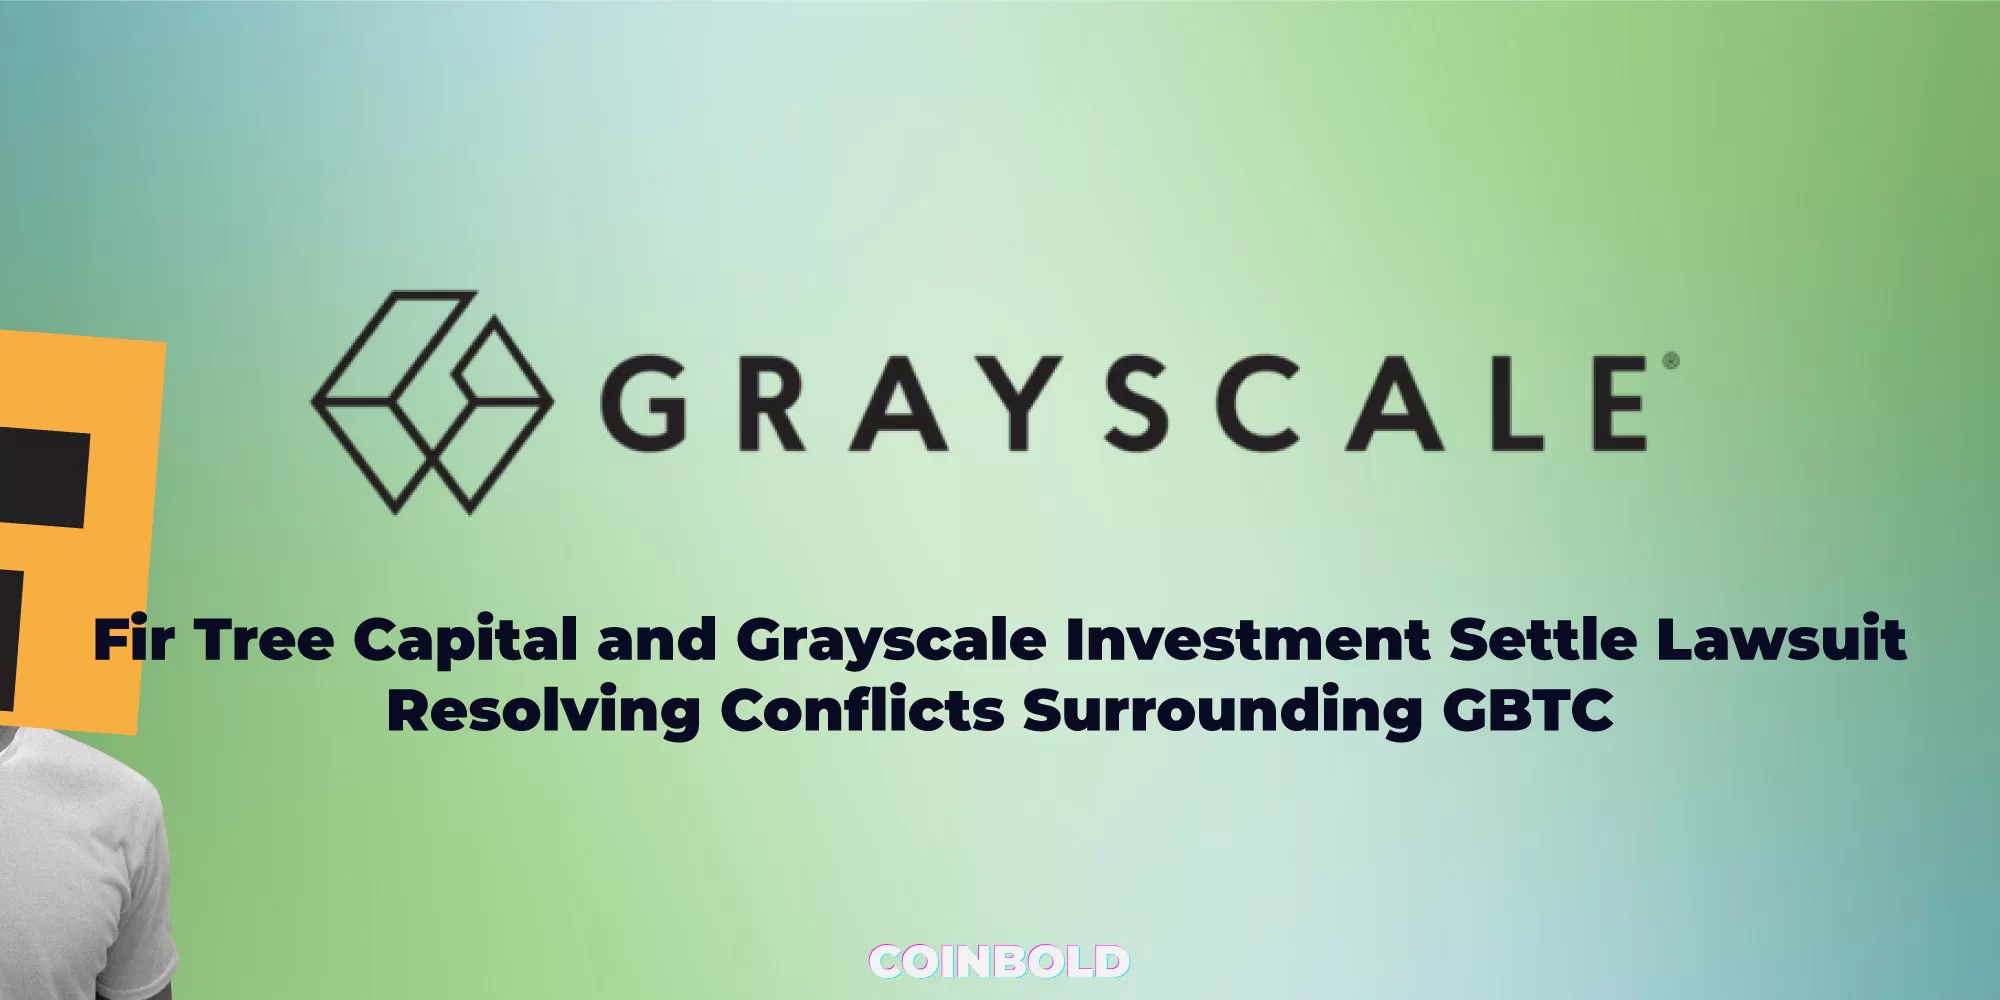 Fir Tree Capital and Grayscale Investment Settle Lawsuit: Resolving Conflicts Surrounding GBTC